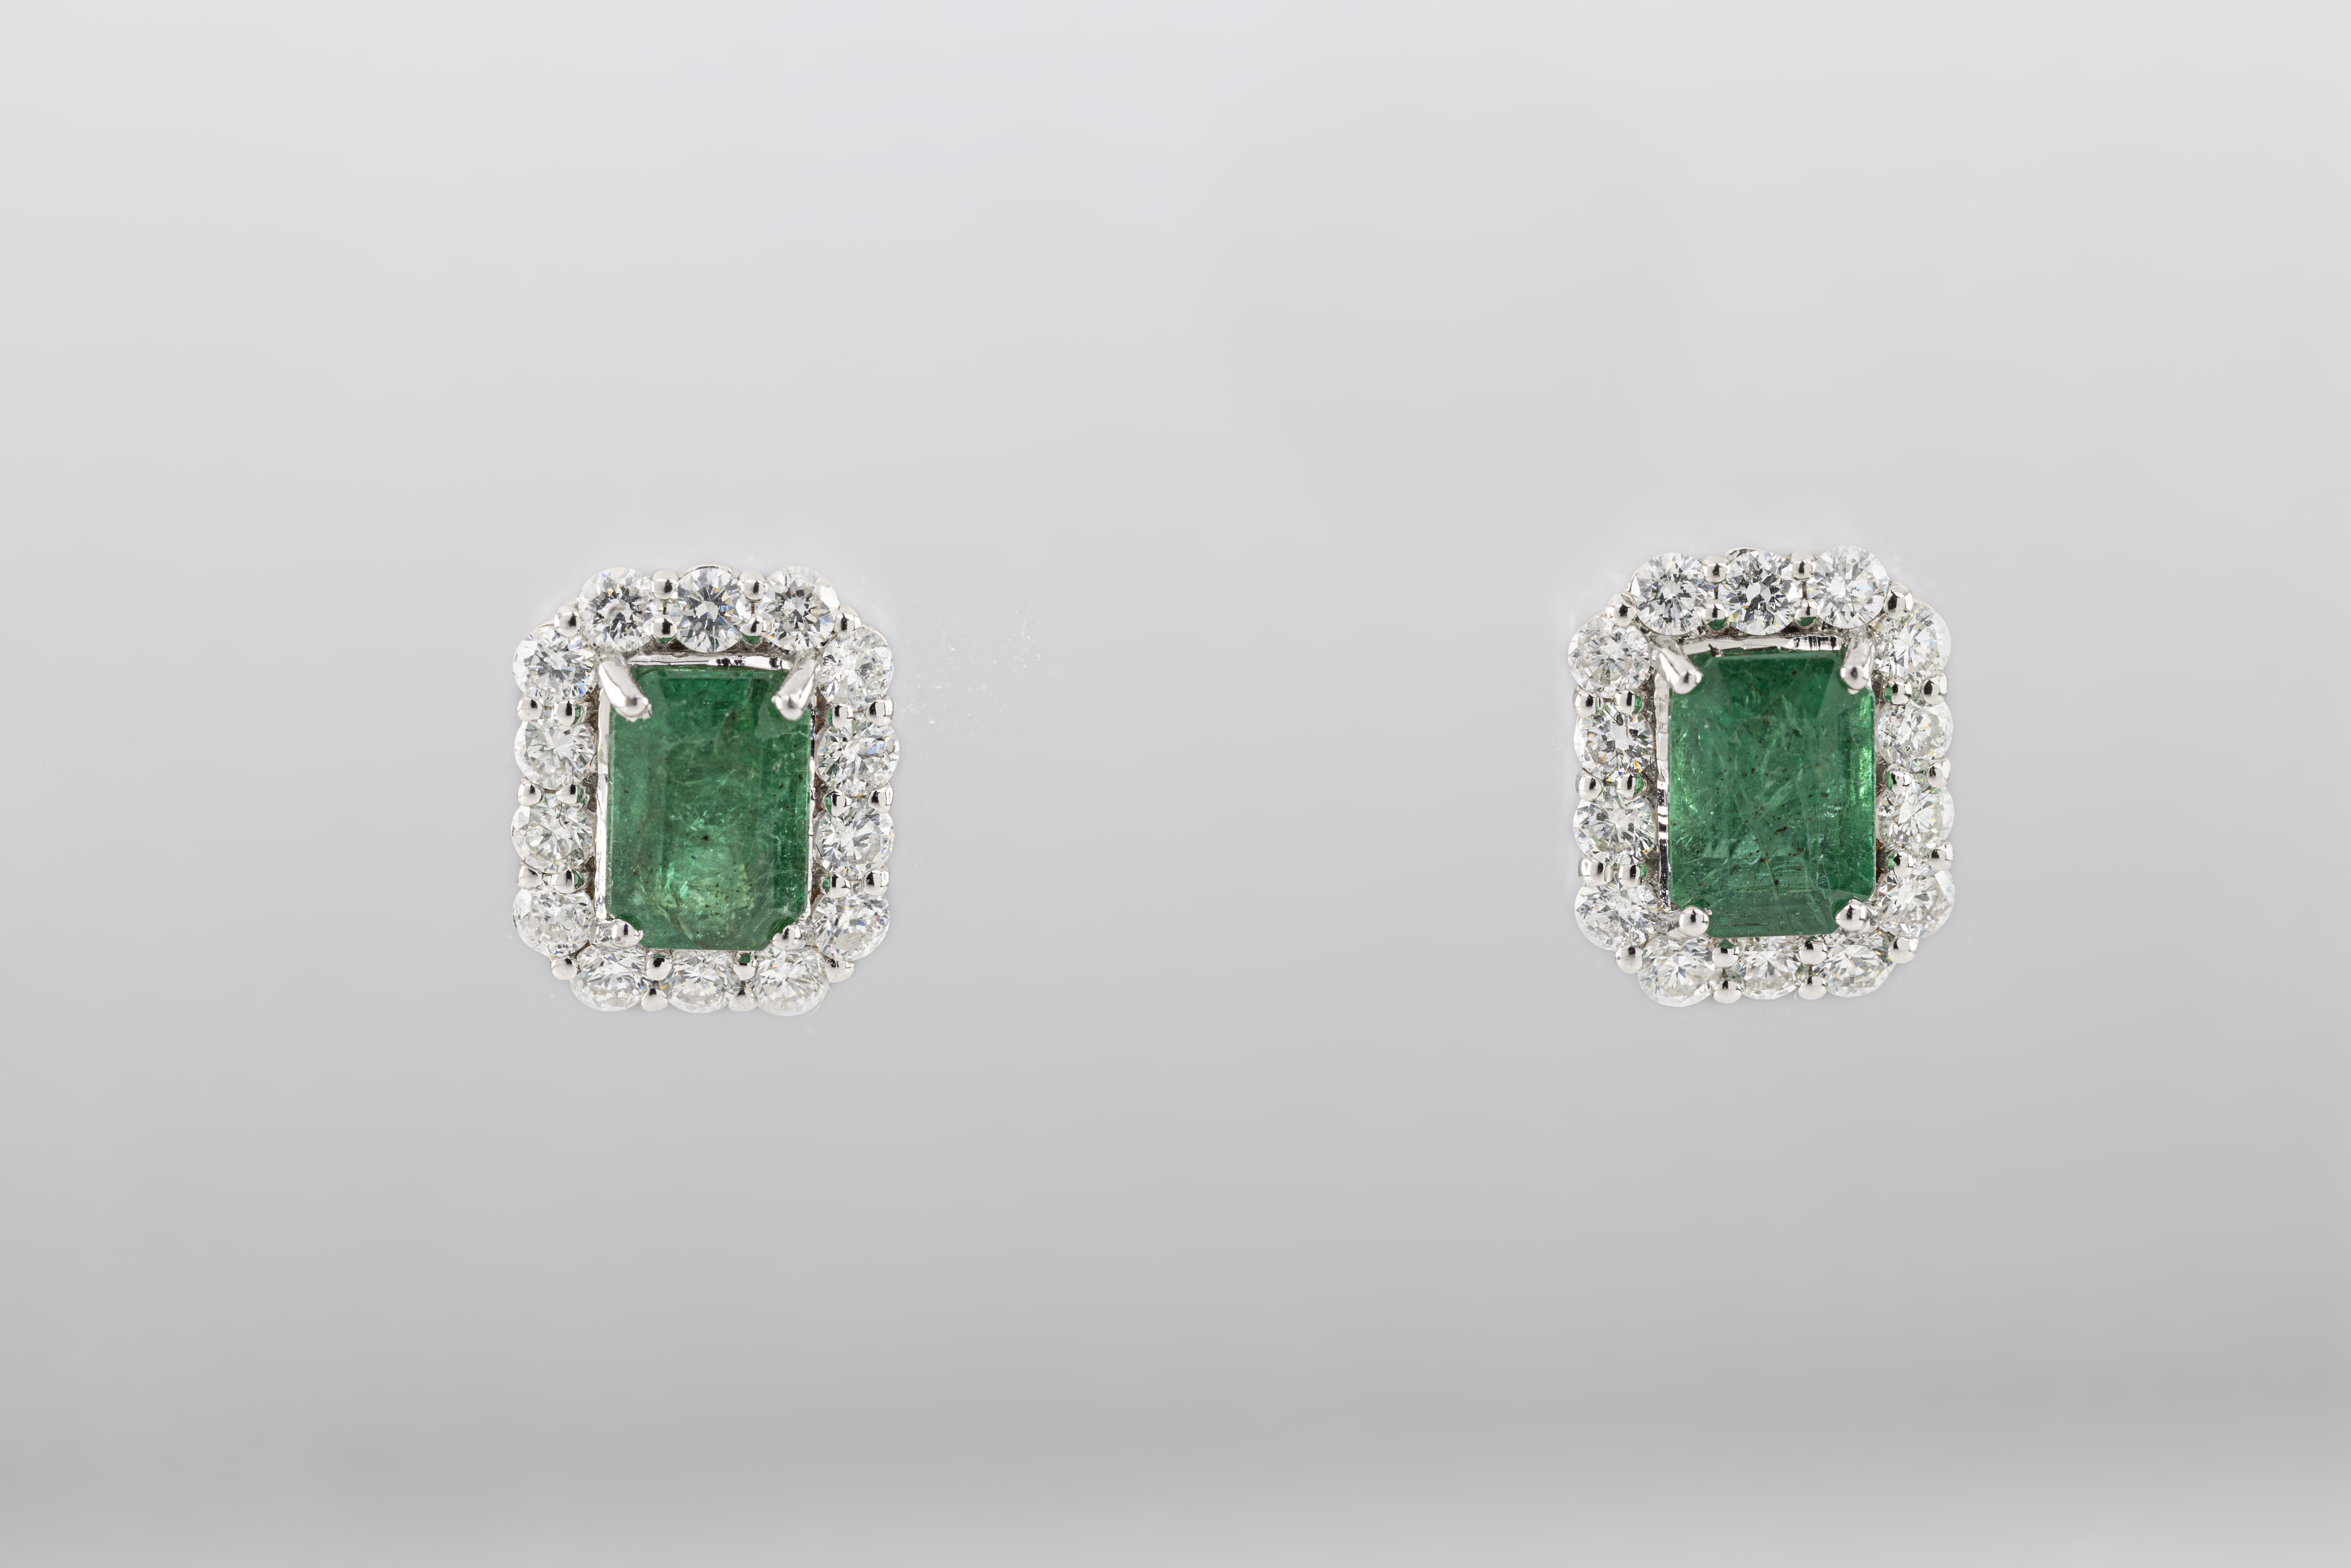 A pair of 18ct white gold emerald and diamond canted rectangular cluster earrings, the emerald-cut